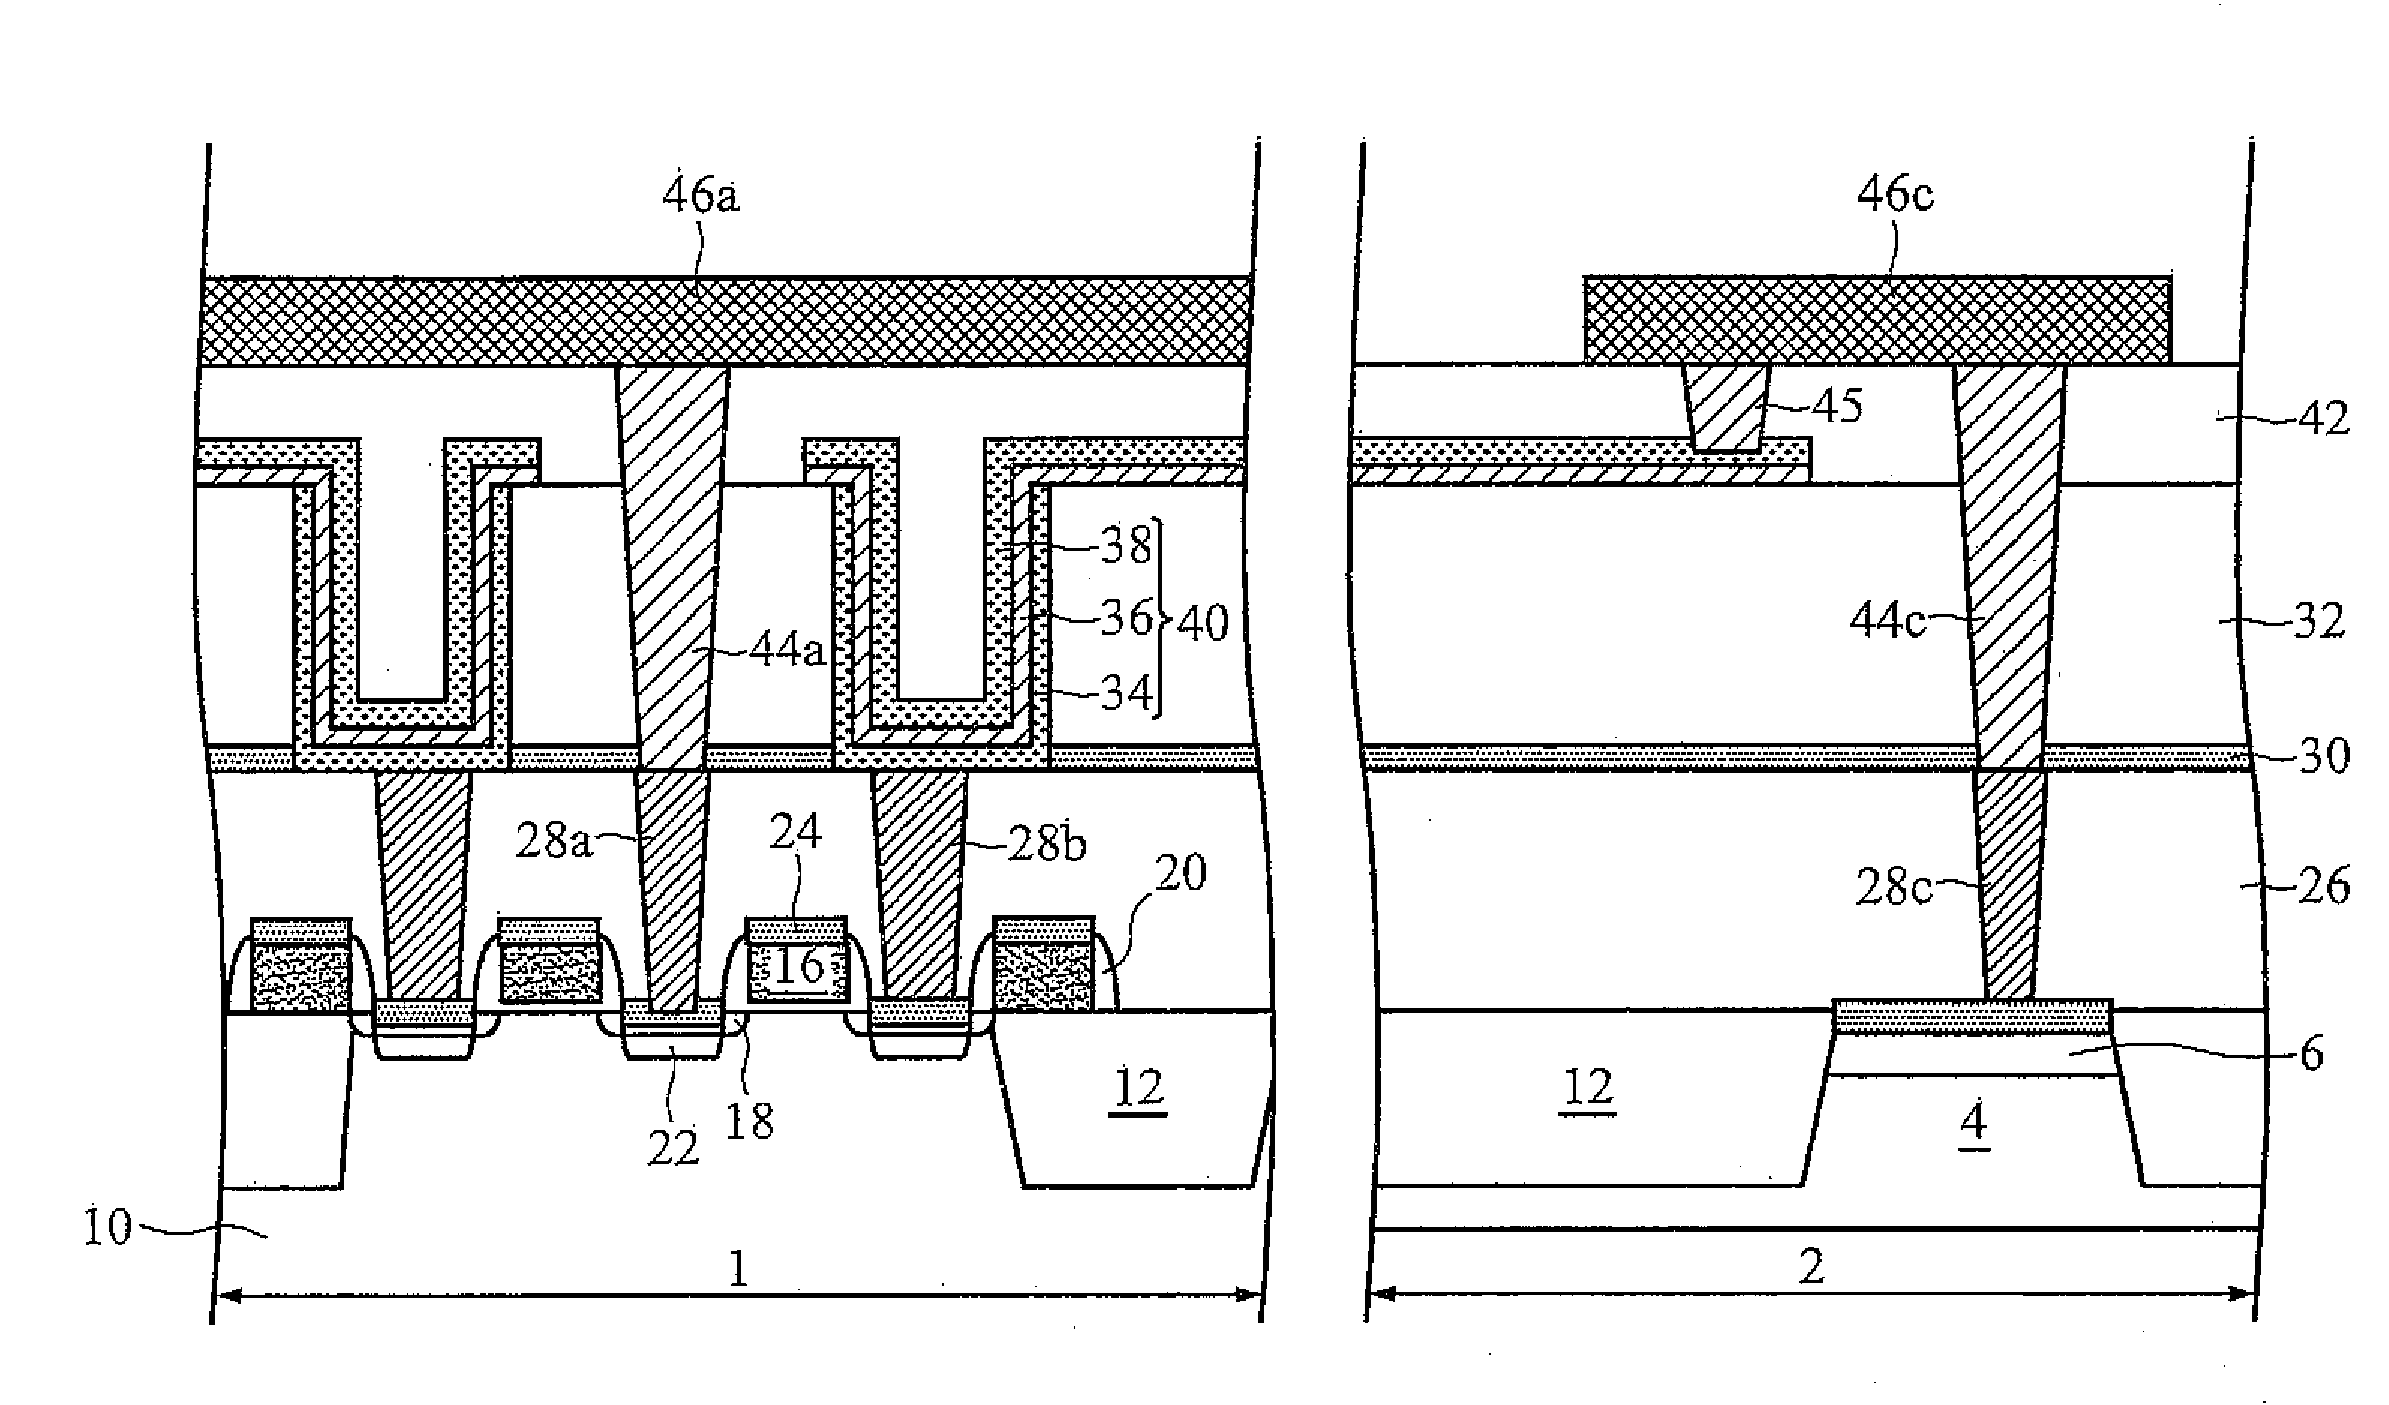 Structure for protecting metal-insulator-metal capacitor in memory device from charge damage